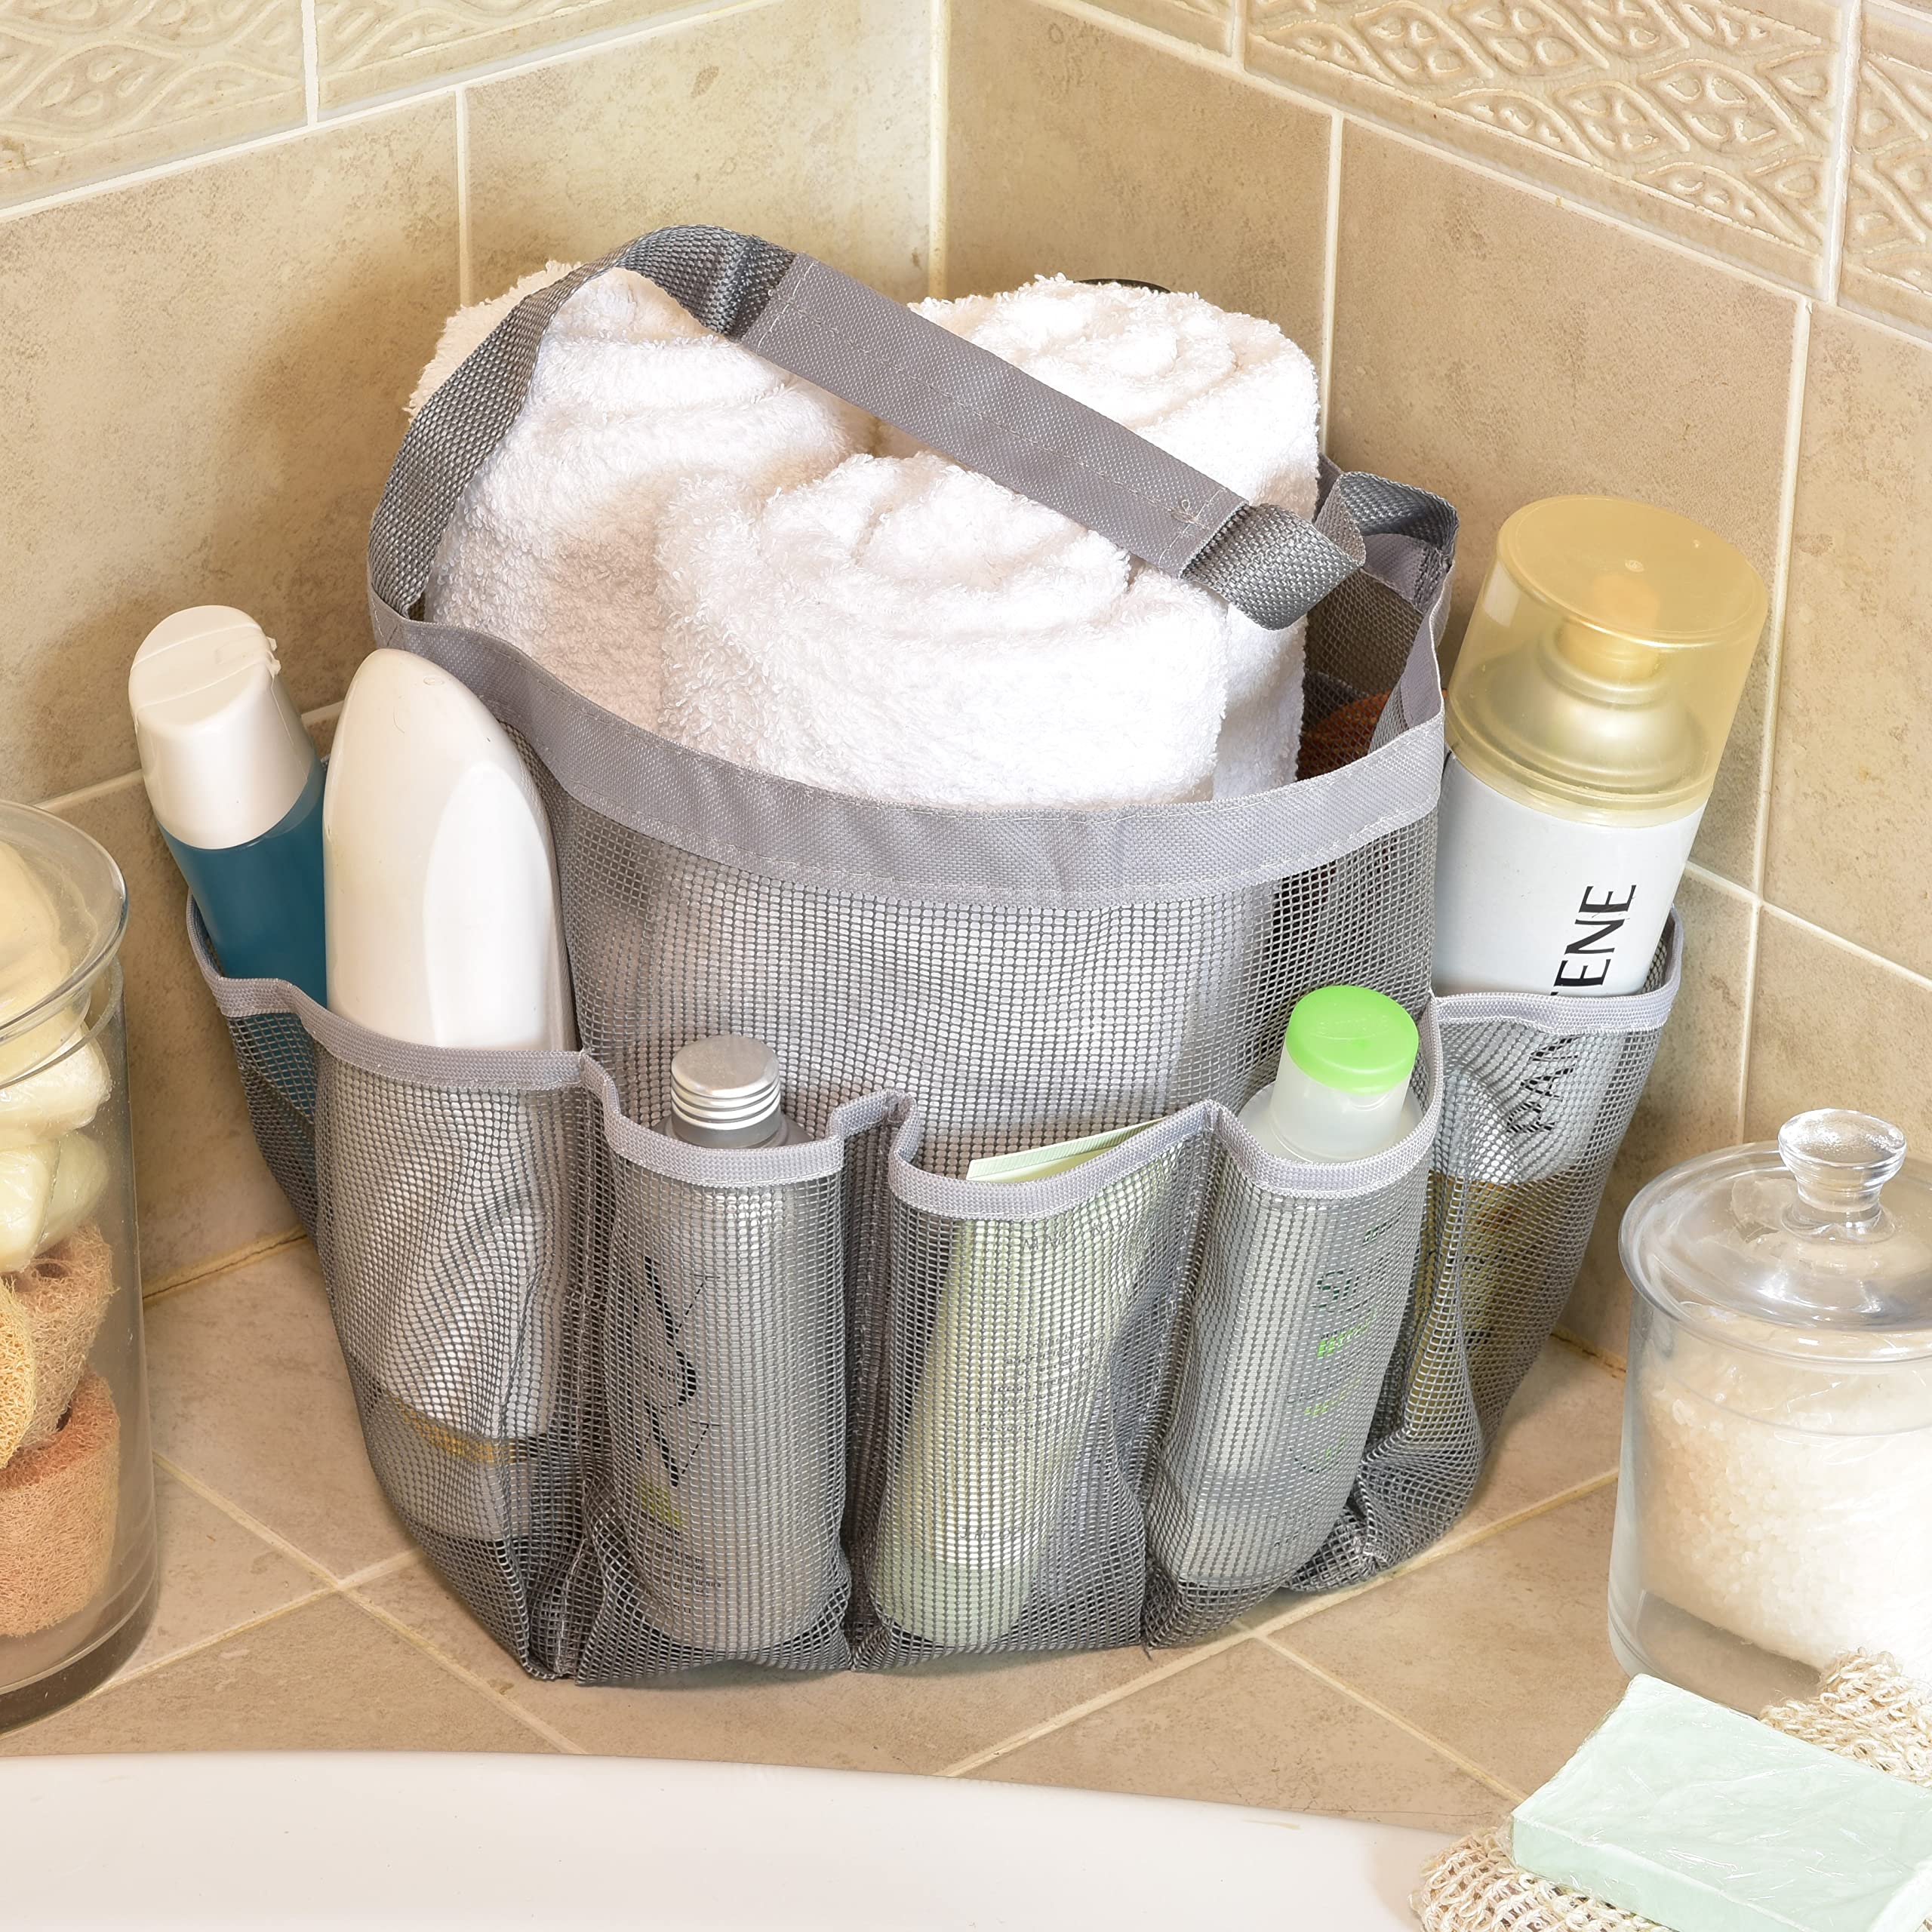 Shower Caddy Portable - Hanging Bathroom Organizer, Waterproof Mesh Tote Bags with Handles and Pockets, Quick Drying Storage Basket for Toiletries, Shampoo, College, Dorm, Camping, Travel, Accessories  - Like New